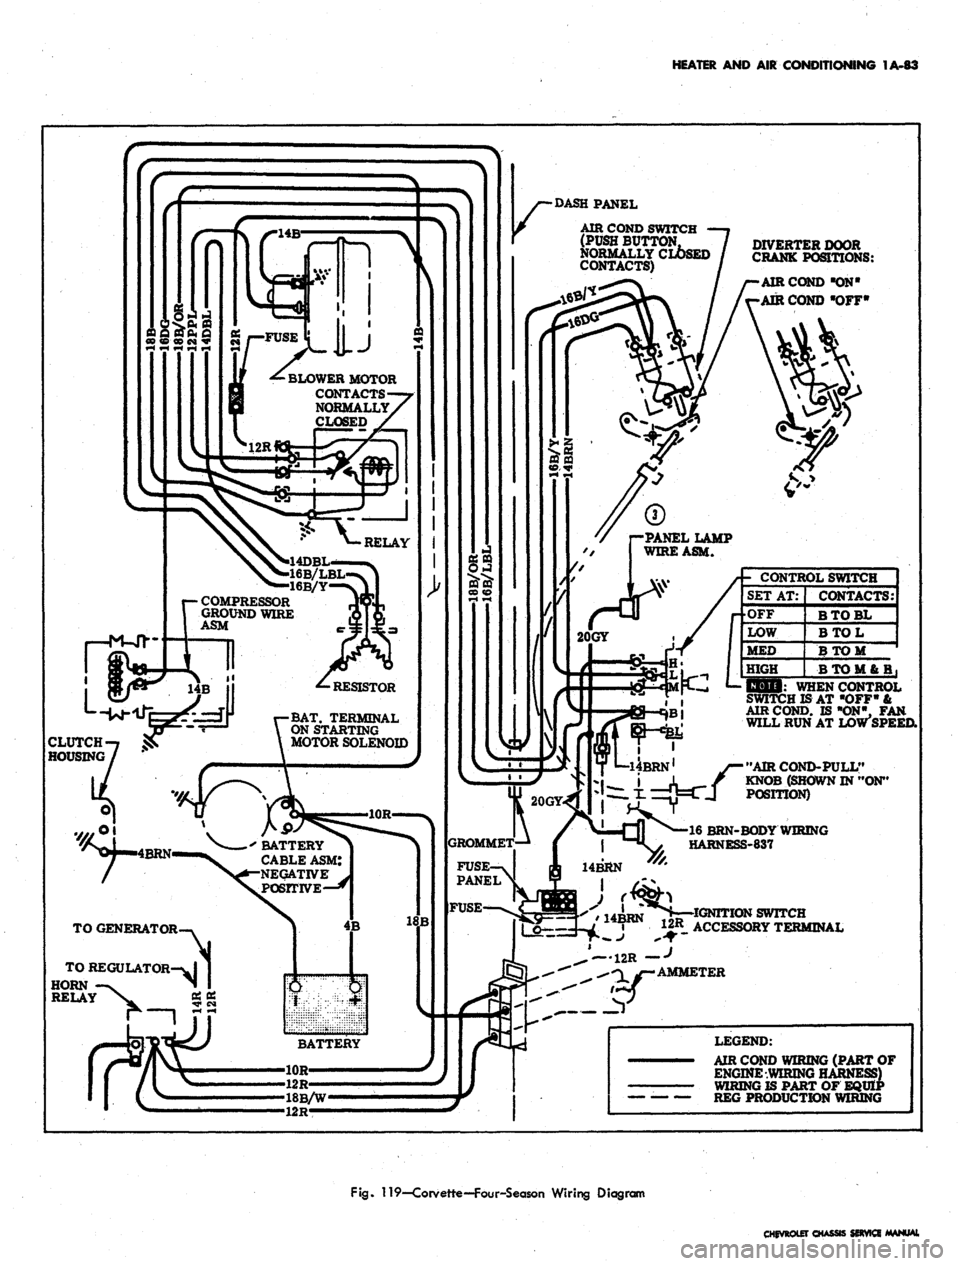 CHEVROLET CAMARO 1967 1.G Chassis Repair Manual 
HEATER AND AIR CONDITIONING 1A-83

DIVERTER DOOR

CRANK POSITIONS:

AIR COND "ON"

AIR COND "OFF*
AIR COND SWITCH

(PUSH BUTTON,

NORMALLY CLOSED

CONTACTS)

BLOWER MOTOR

CONTACTS

NORMALLY

4D

16
